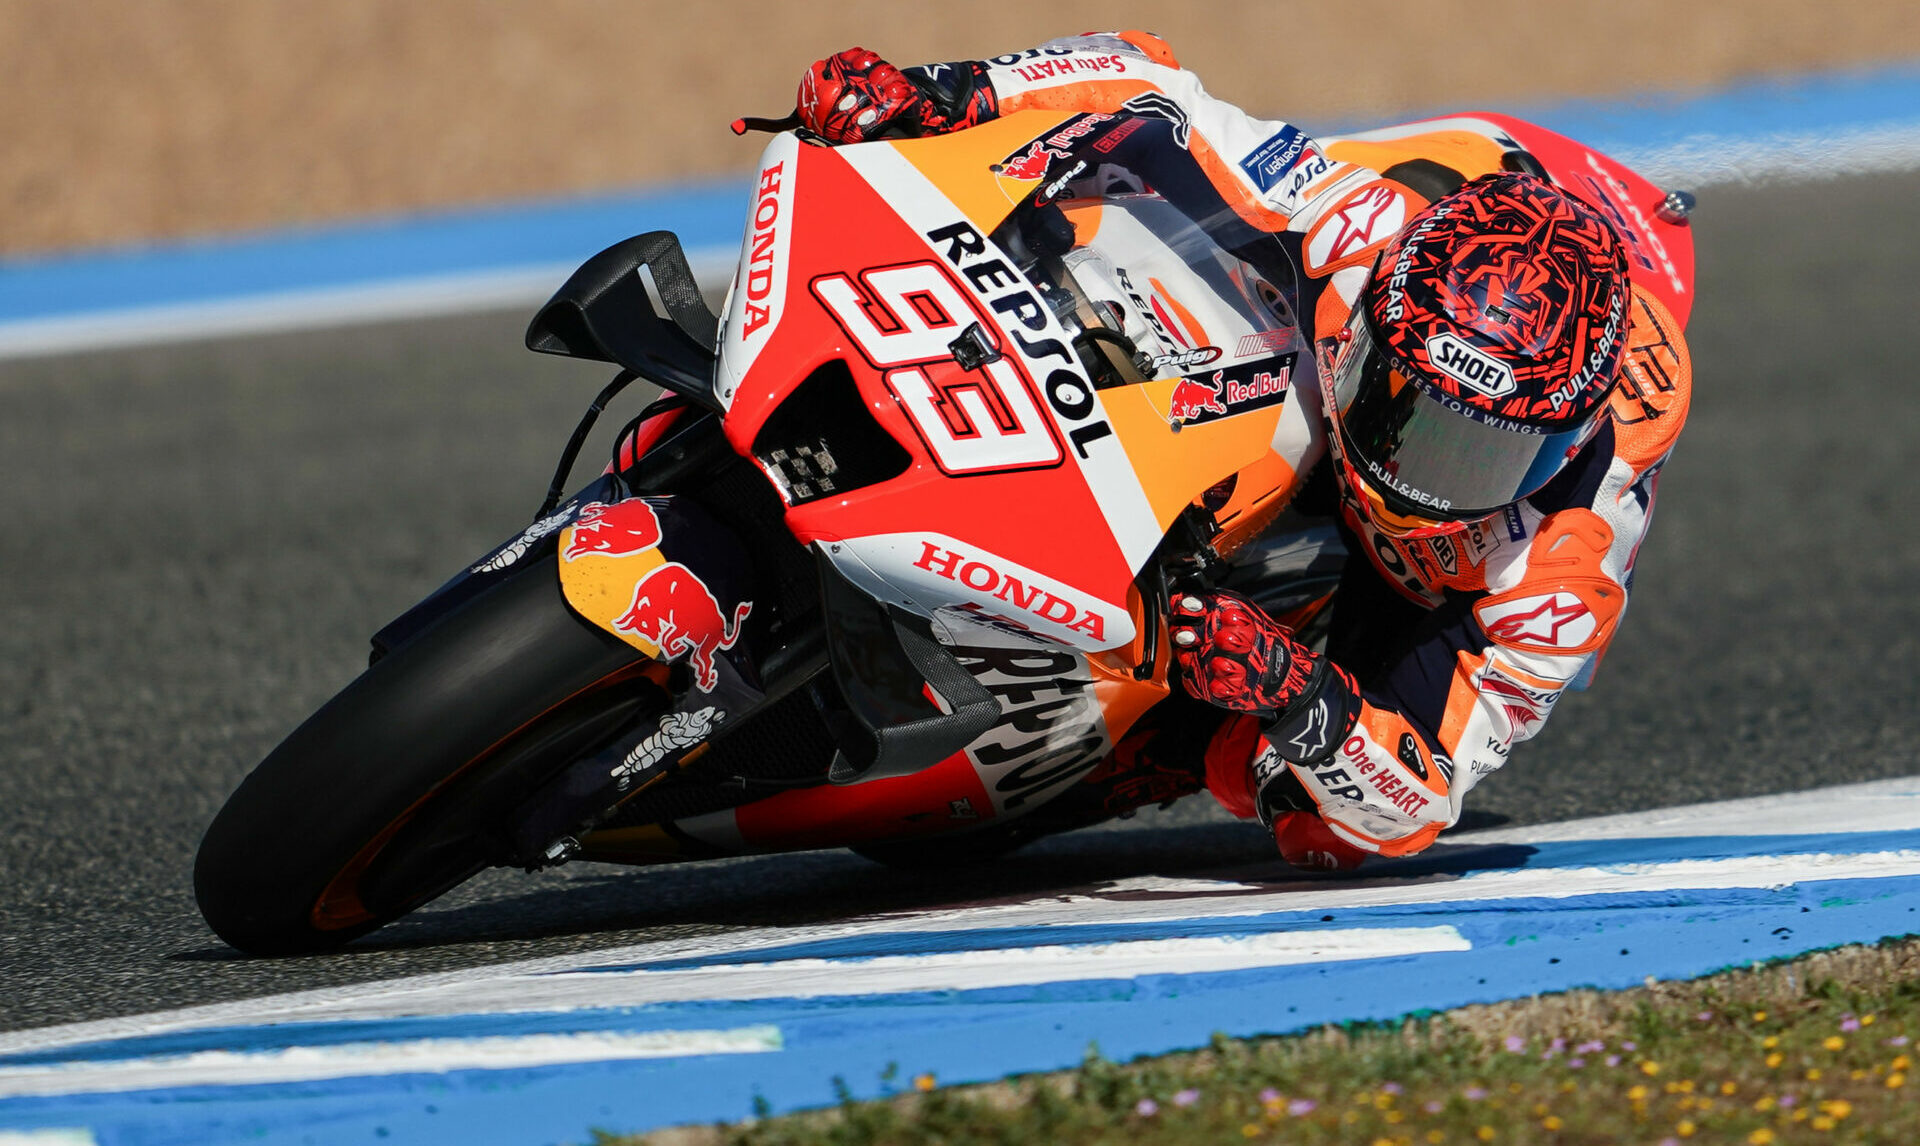 Marc Marquez (93), as seen in action at Jerez. Photo courtesy Repsol Honda.